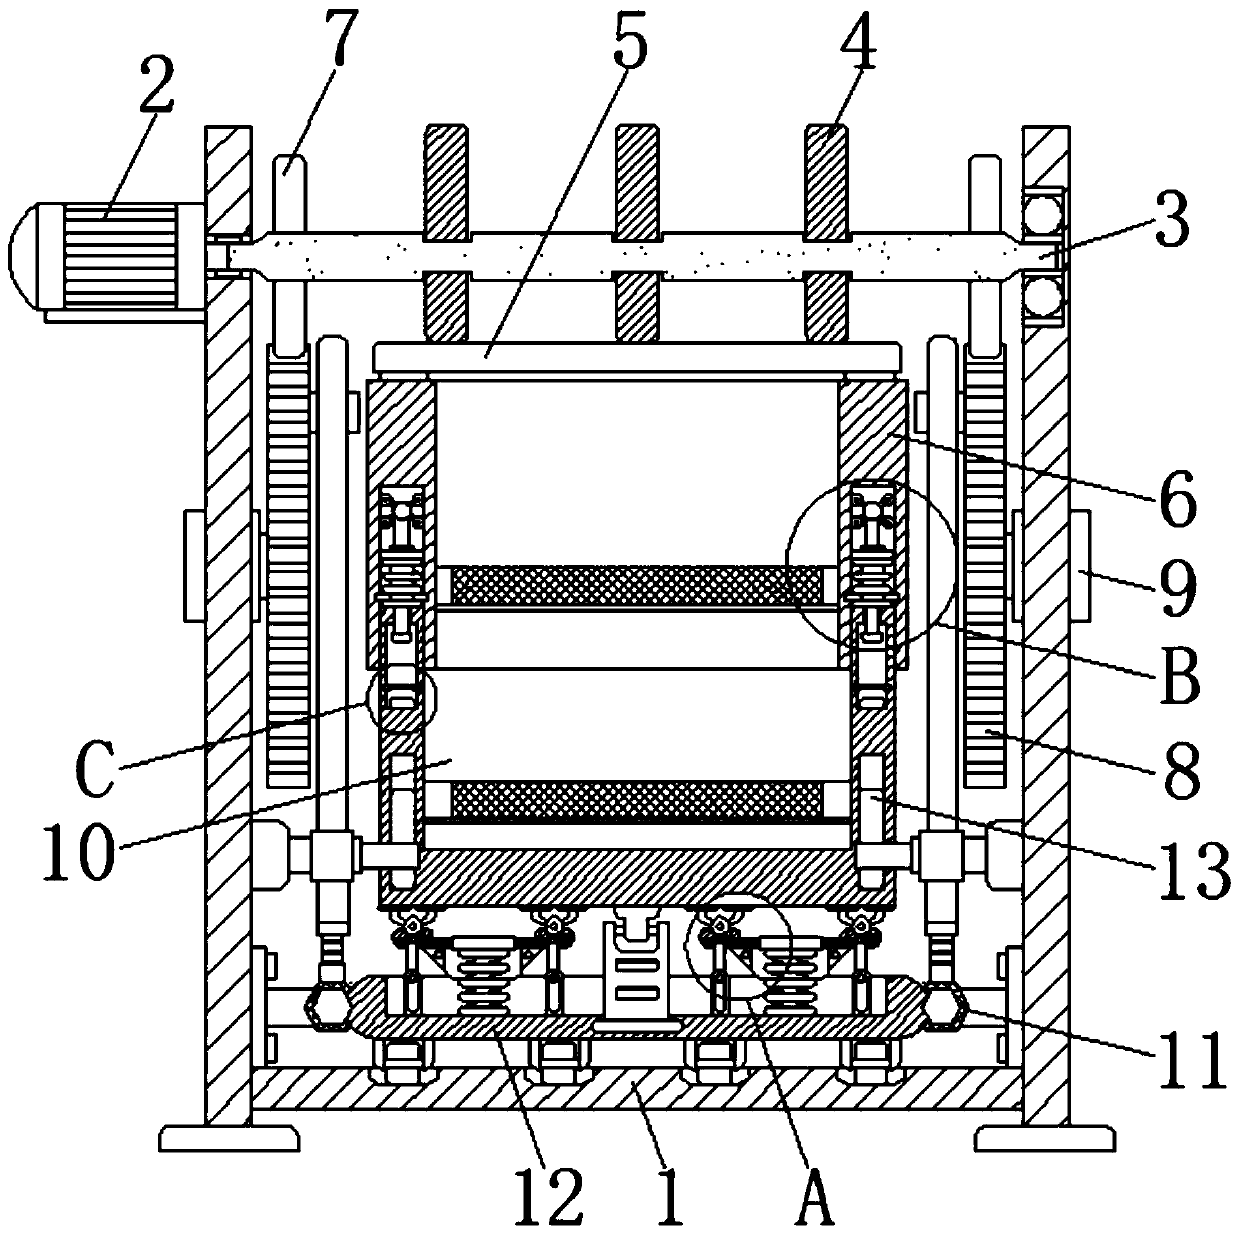 A screening device for the reproduction of petroleum asphalt mixture